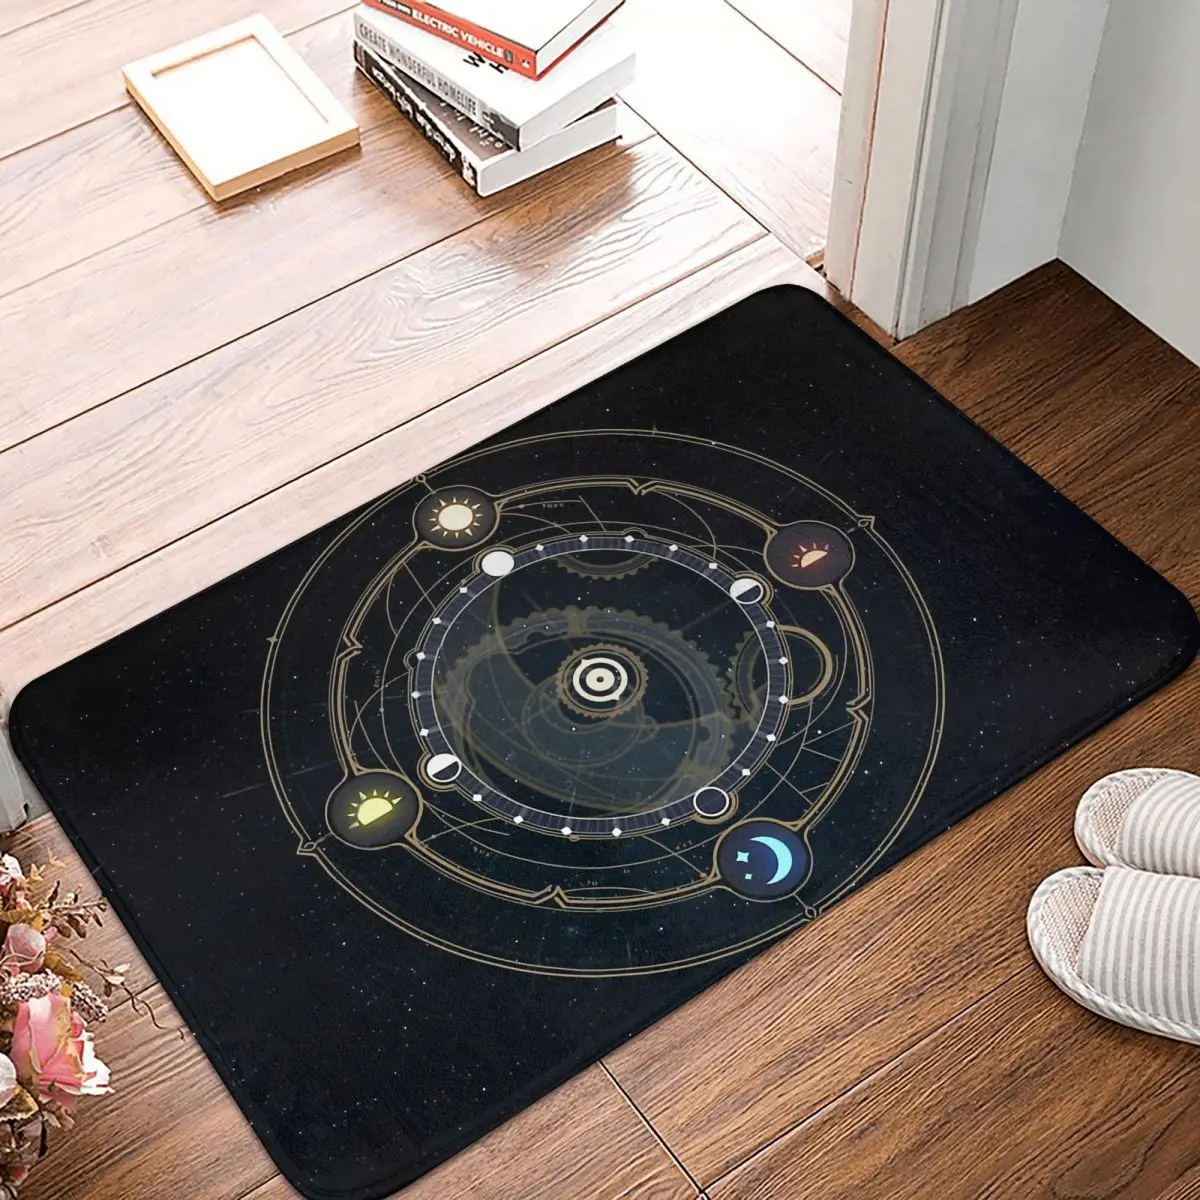 

Genshin Impact New Characters Events And Areas Are Provided For You To Explore Anti-Slip Doormat Kitchen Mat Magical Clock